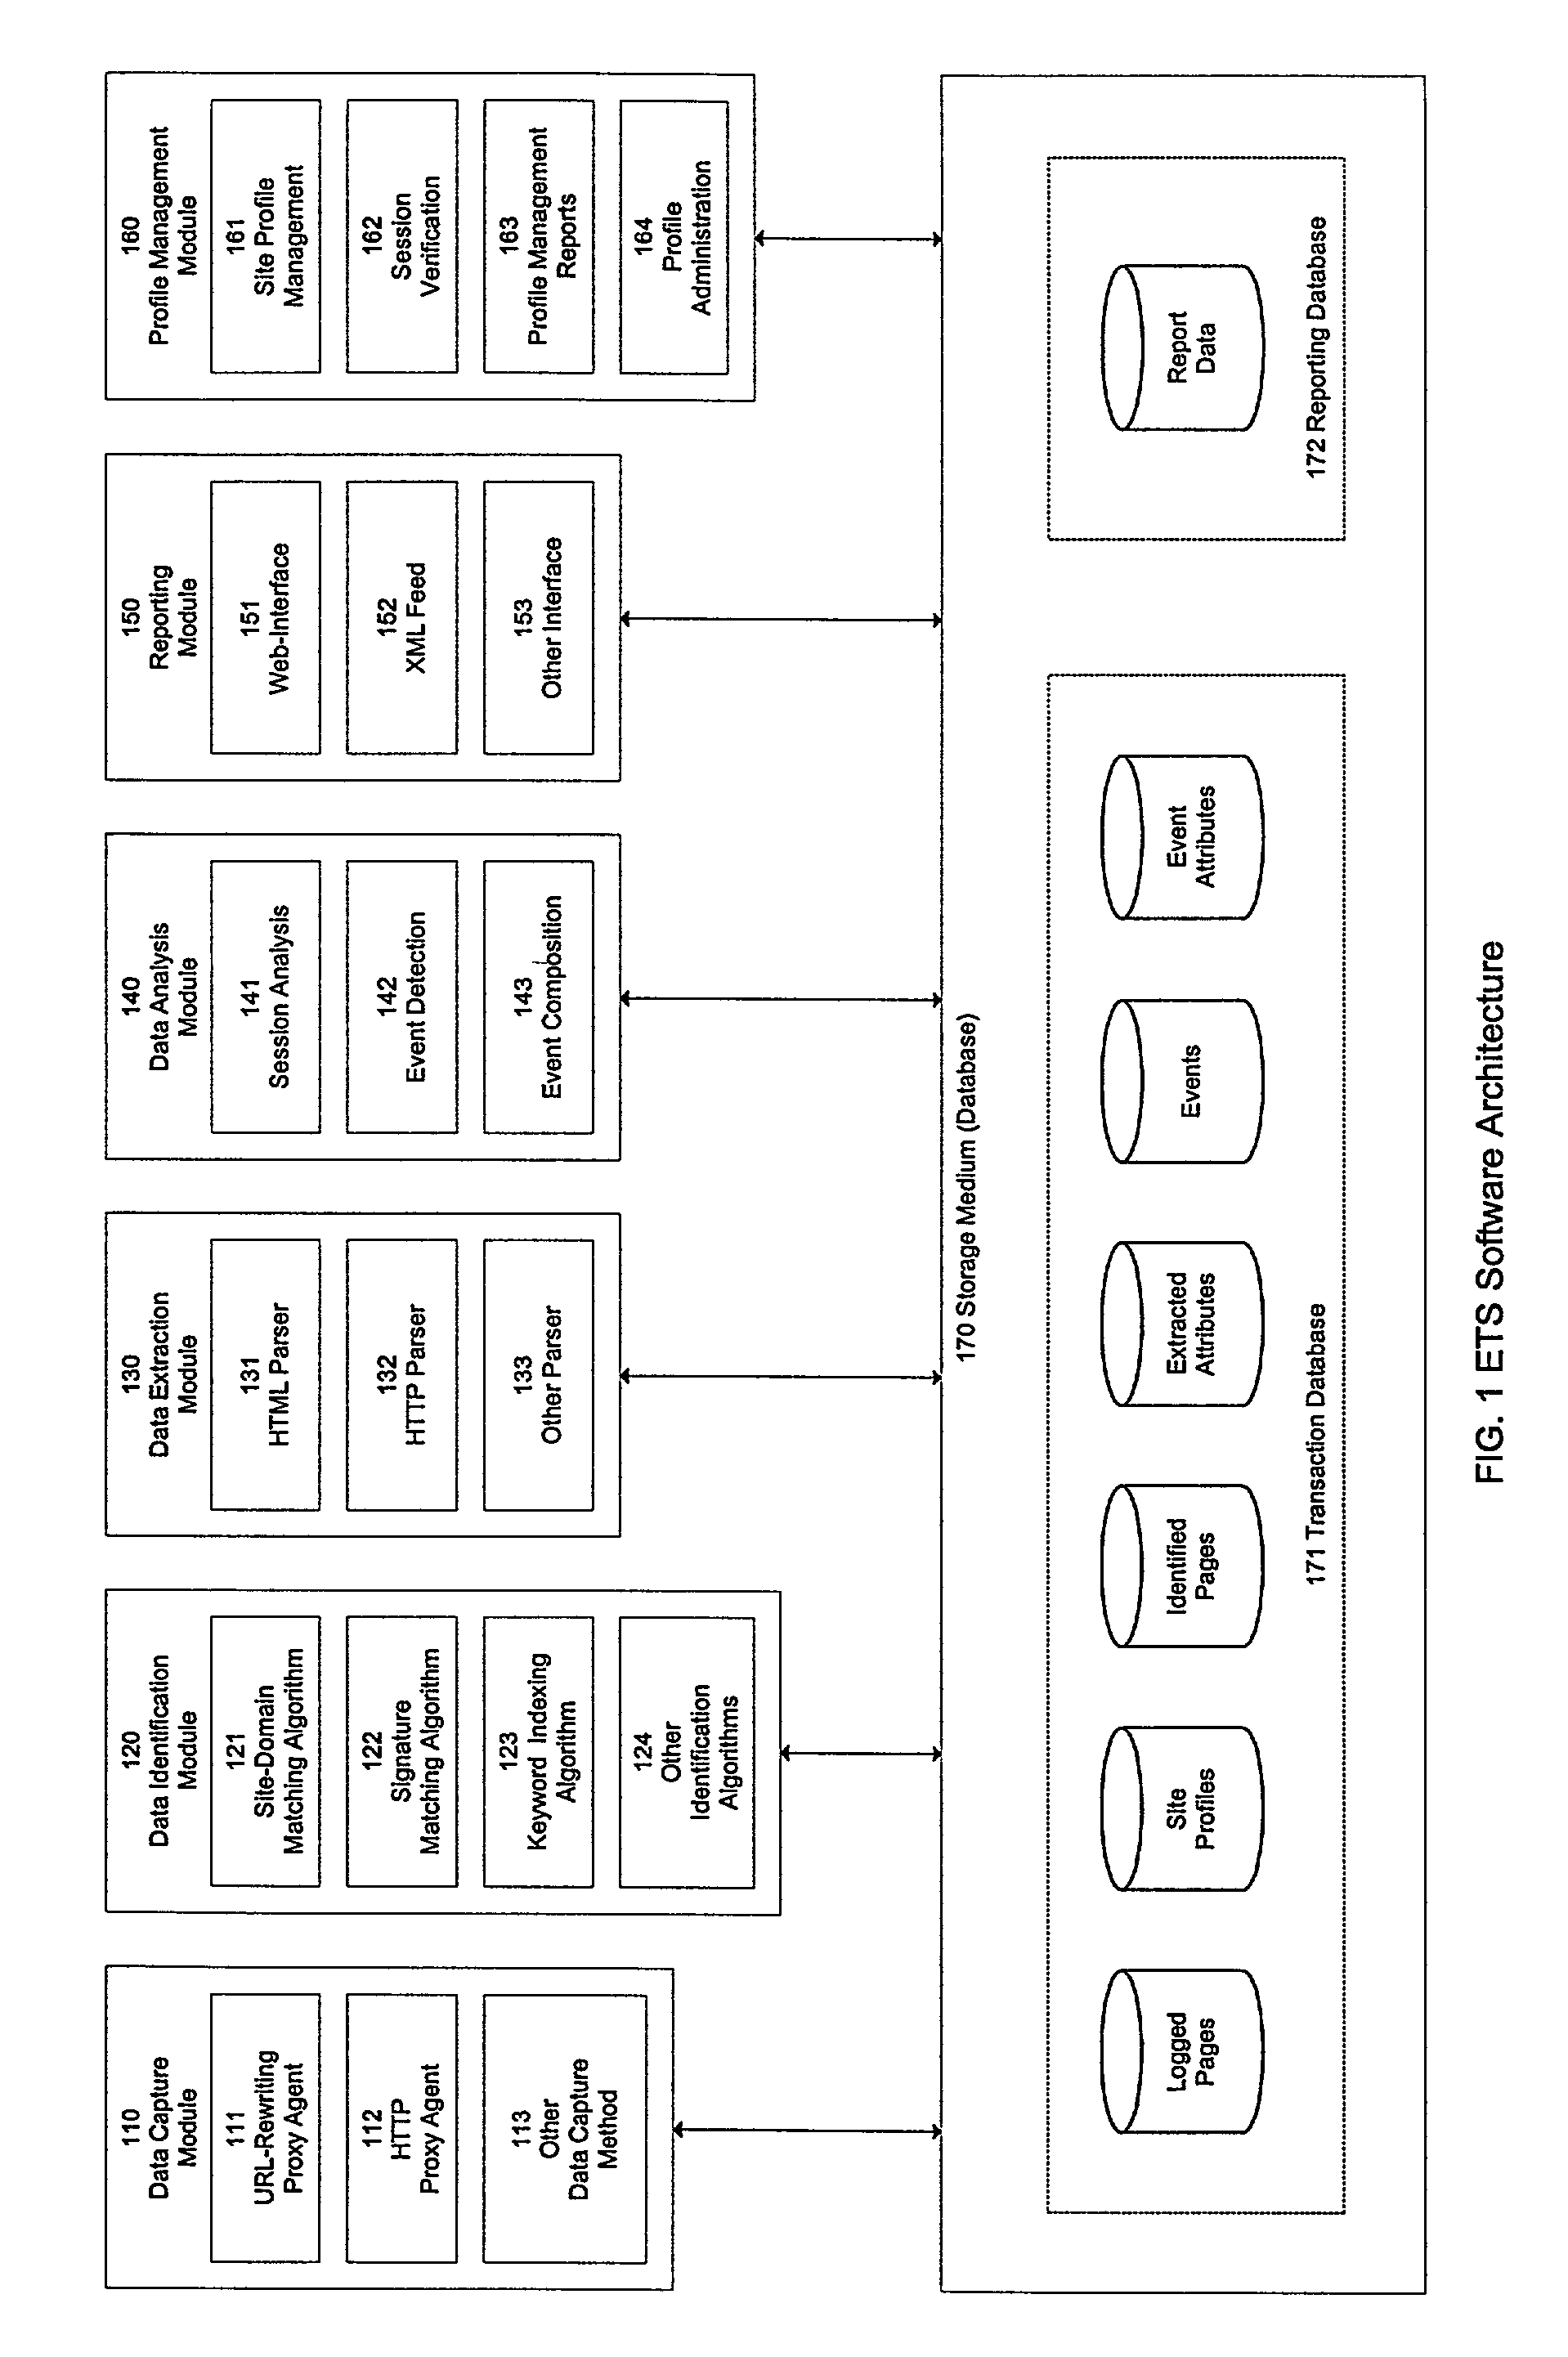 System and method for detecting and reporting online activity using real-time content-based network monitoring